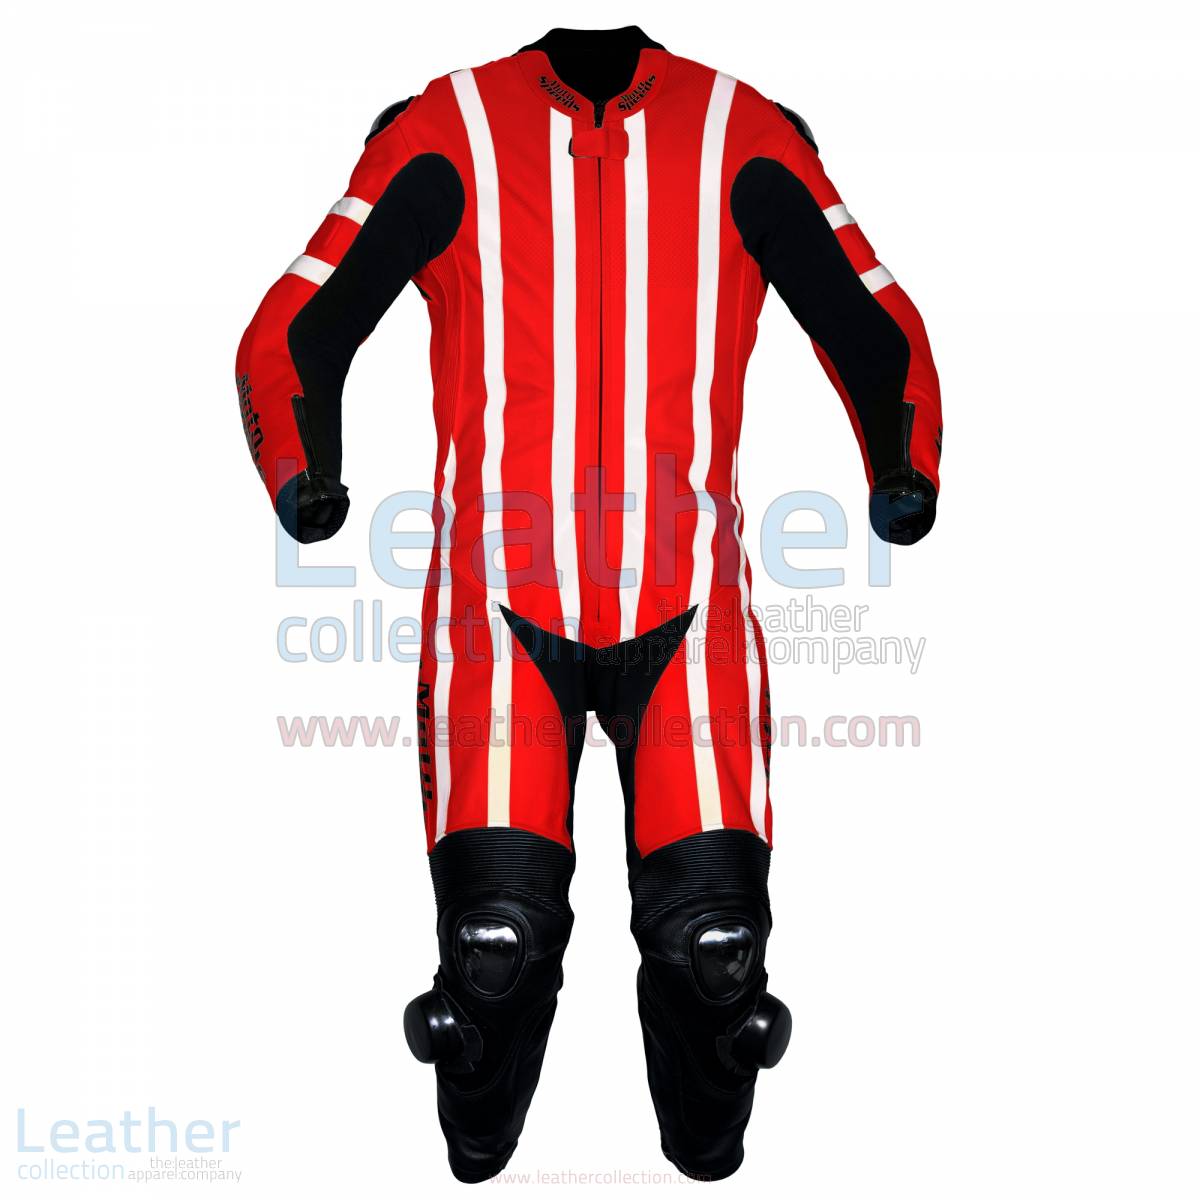 Lined Riding Suit